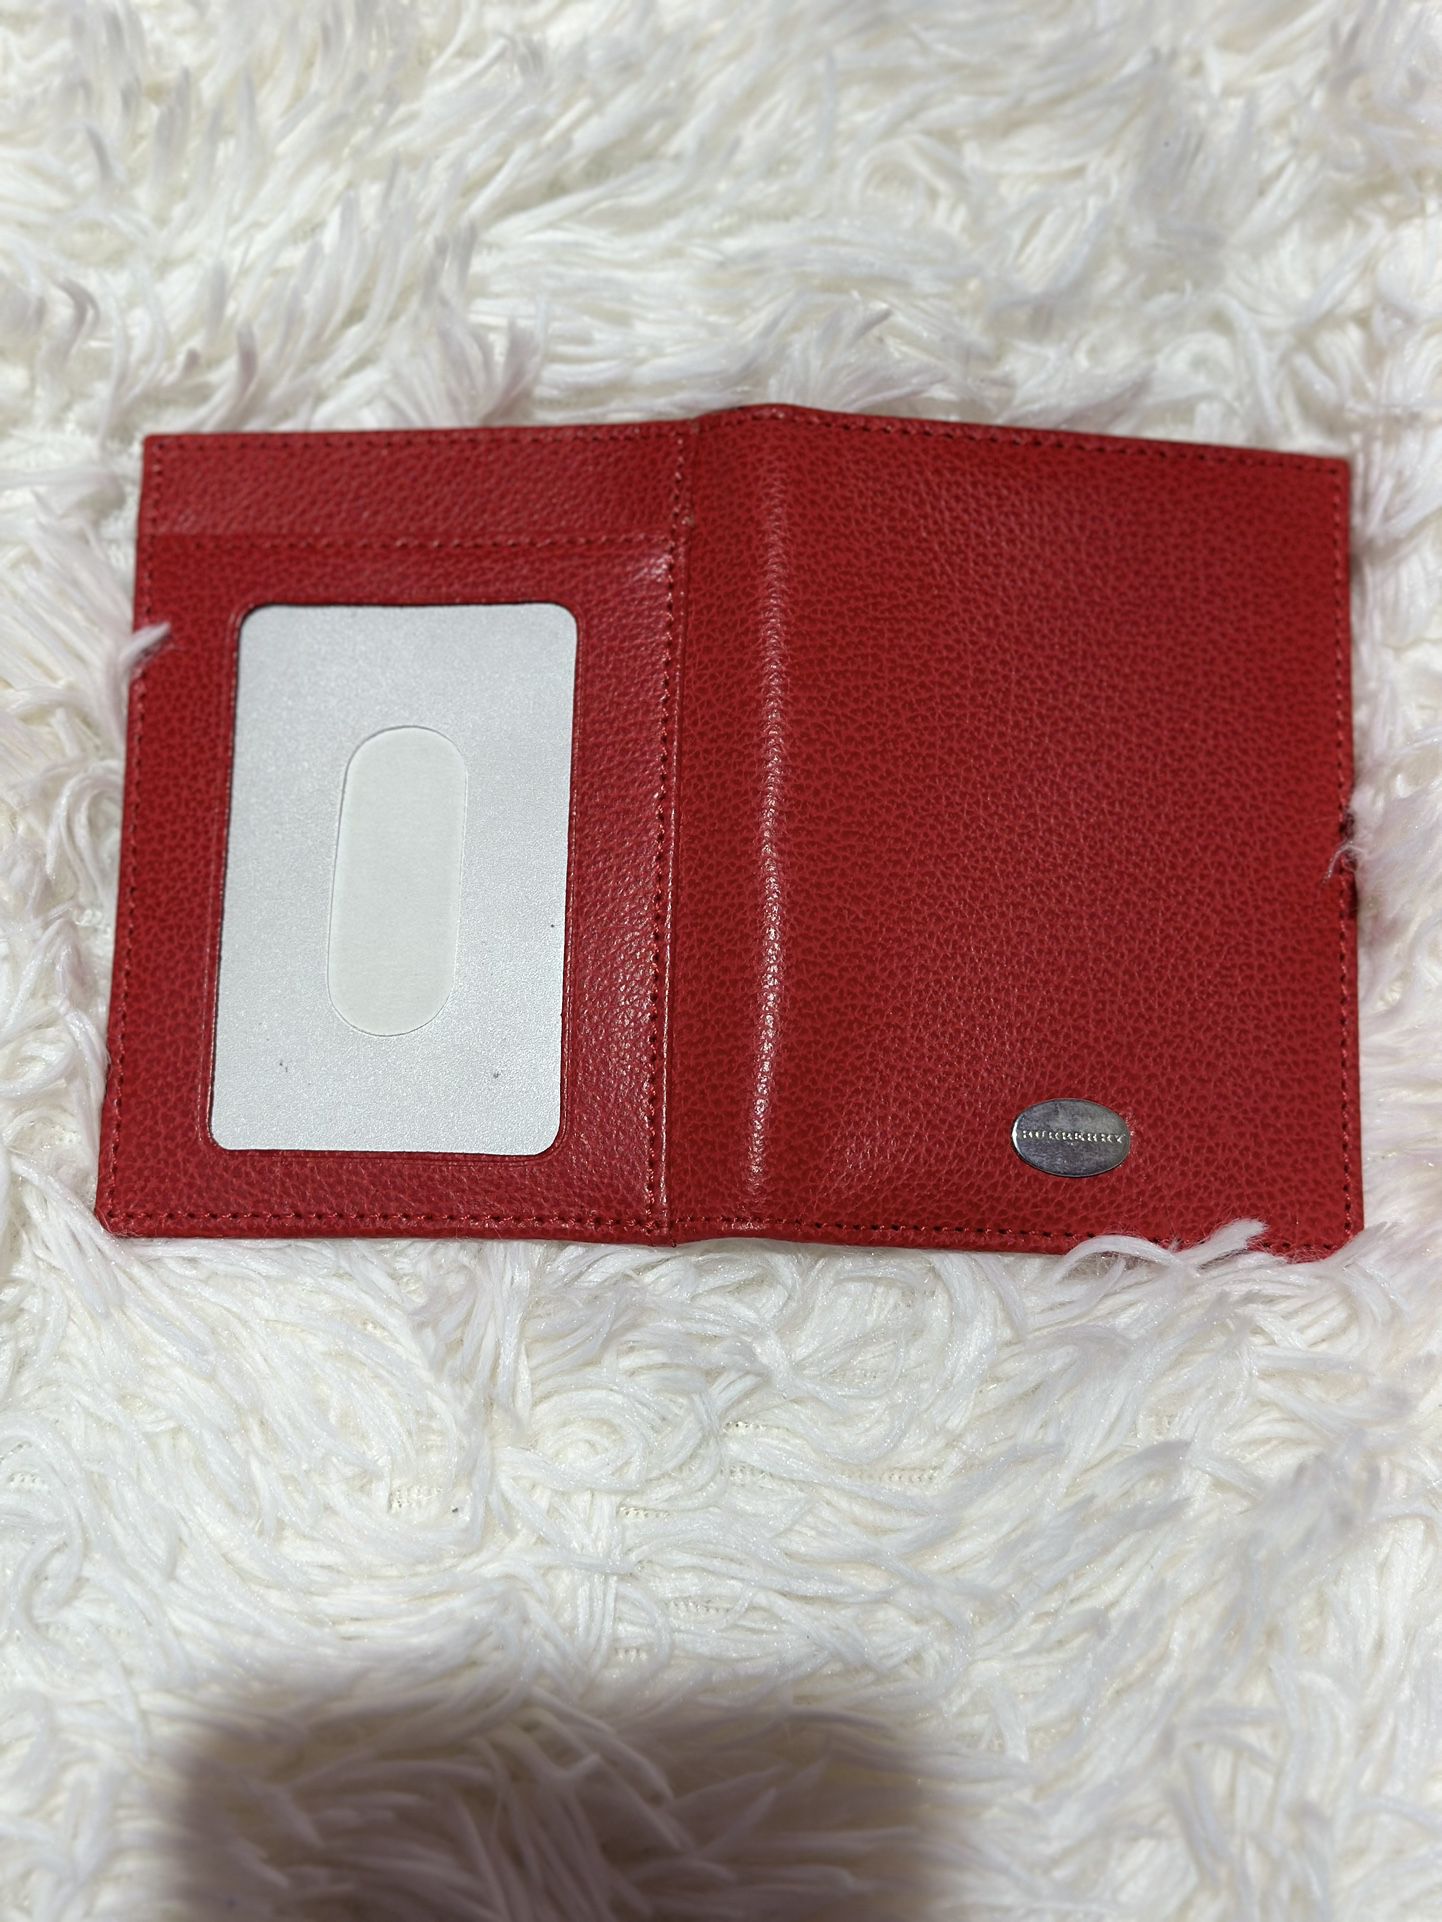 New** Burberry Red Cardholder Wallet 